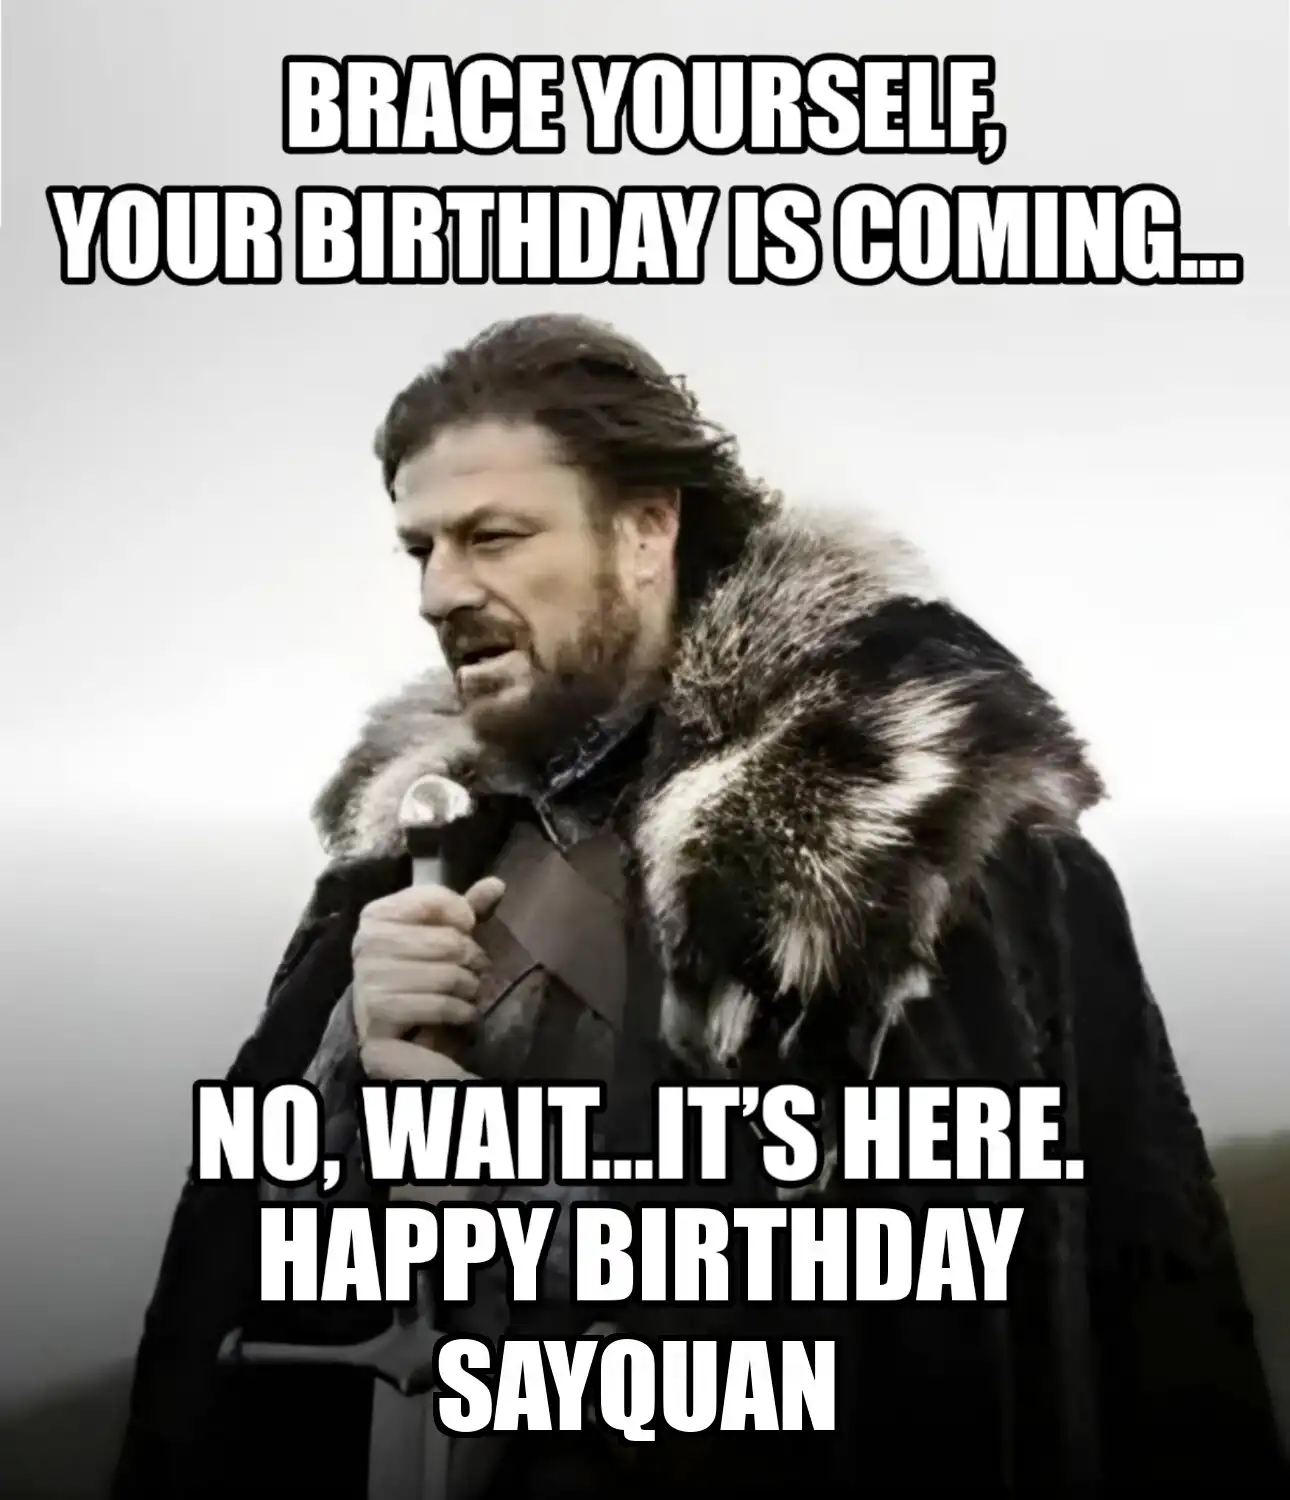 Happy Birthday Sayquan Brace Yourself Your Birthday Is Coming Meme